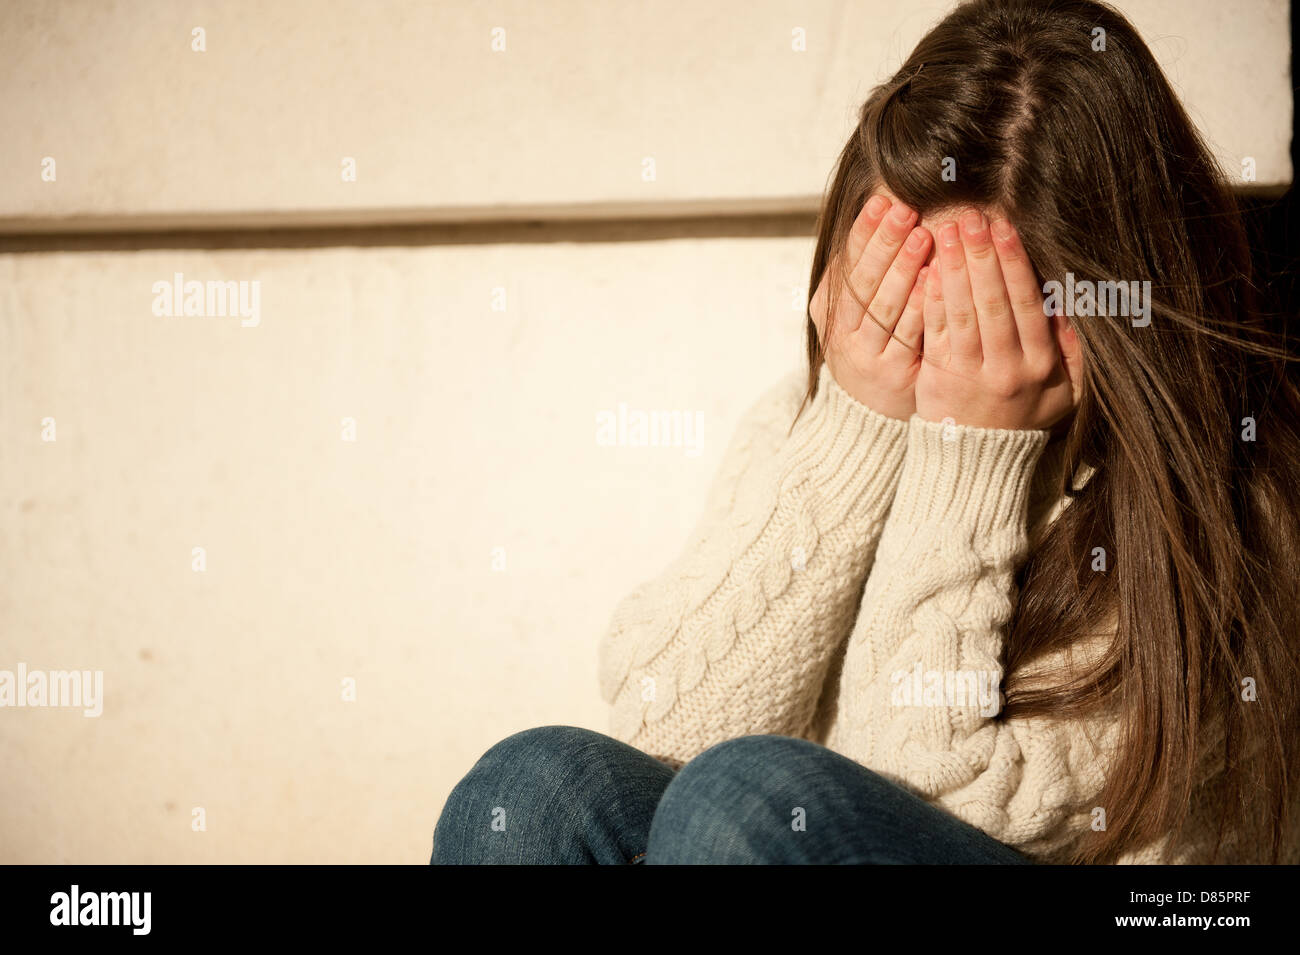 Teenage girl with both hands covering her face. Stock Photo